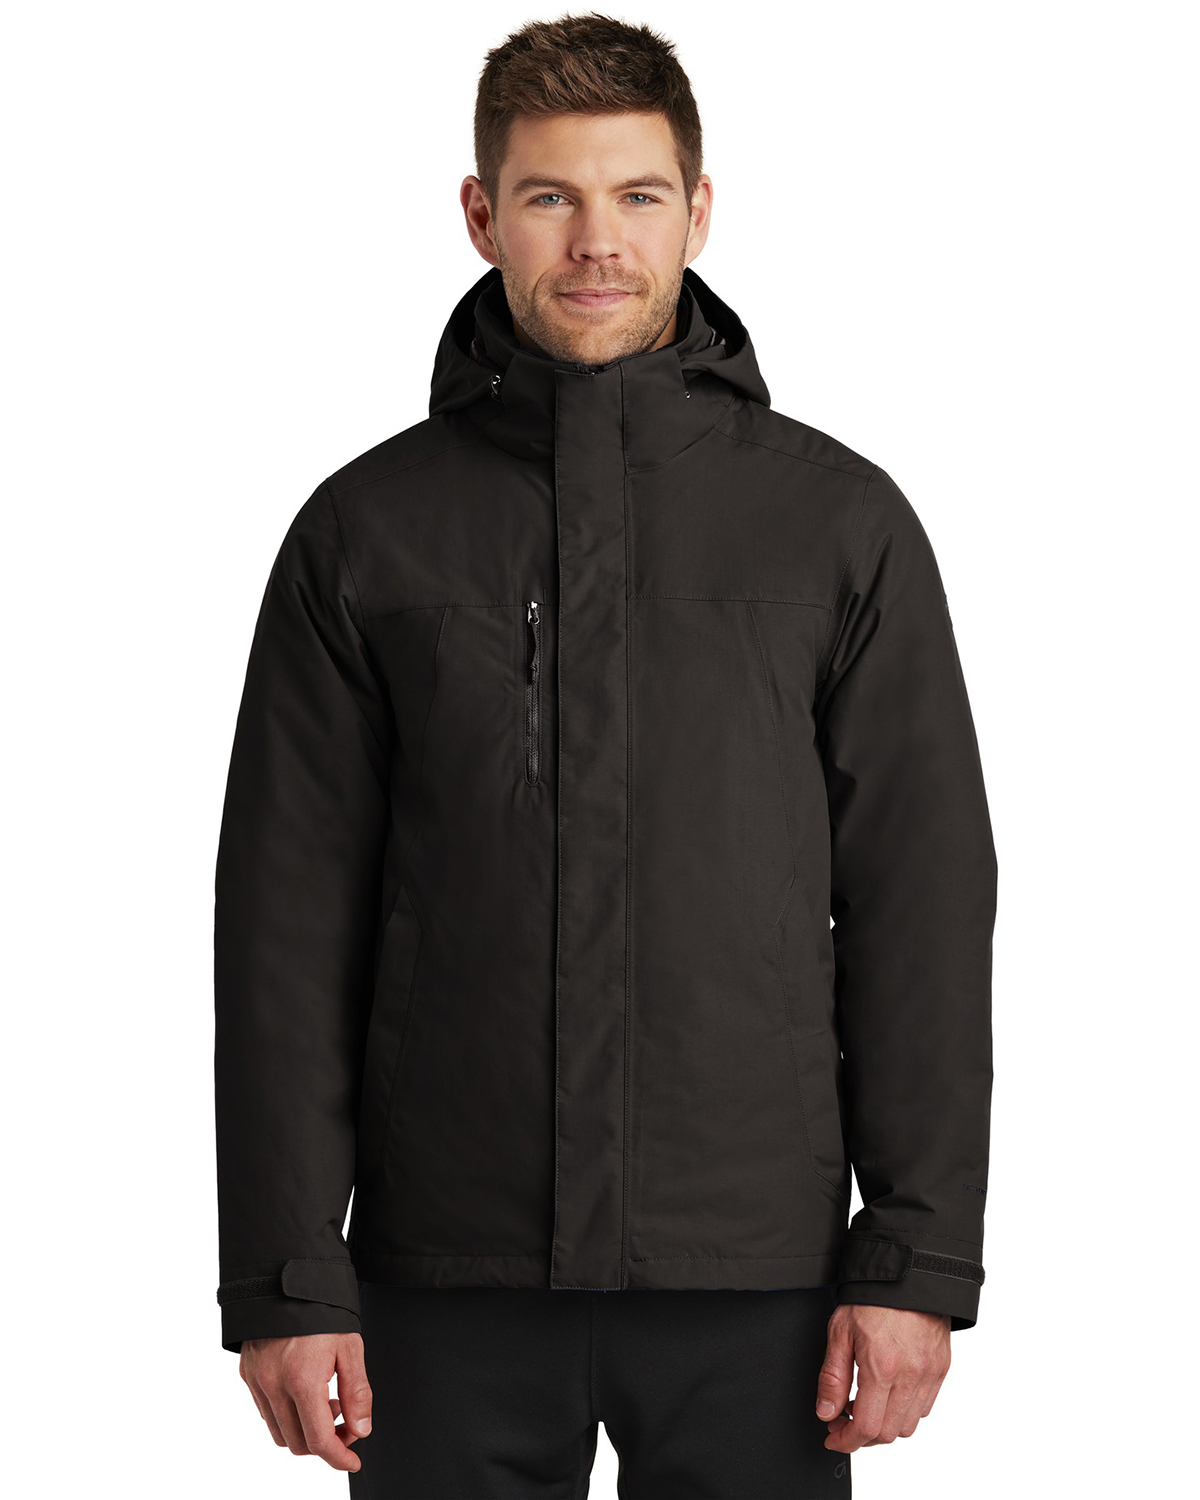 'The North Face NF0A3VHR Traverse Triclimate 3in1 Jacket'